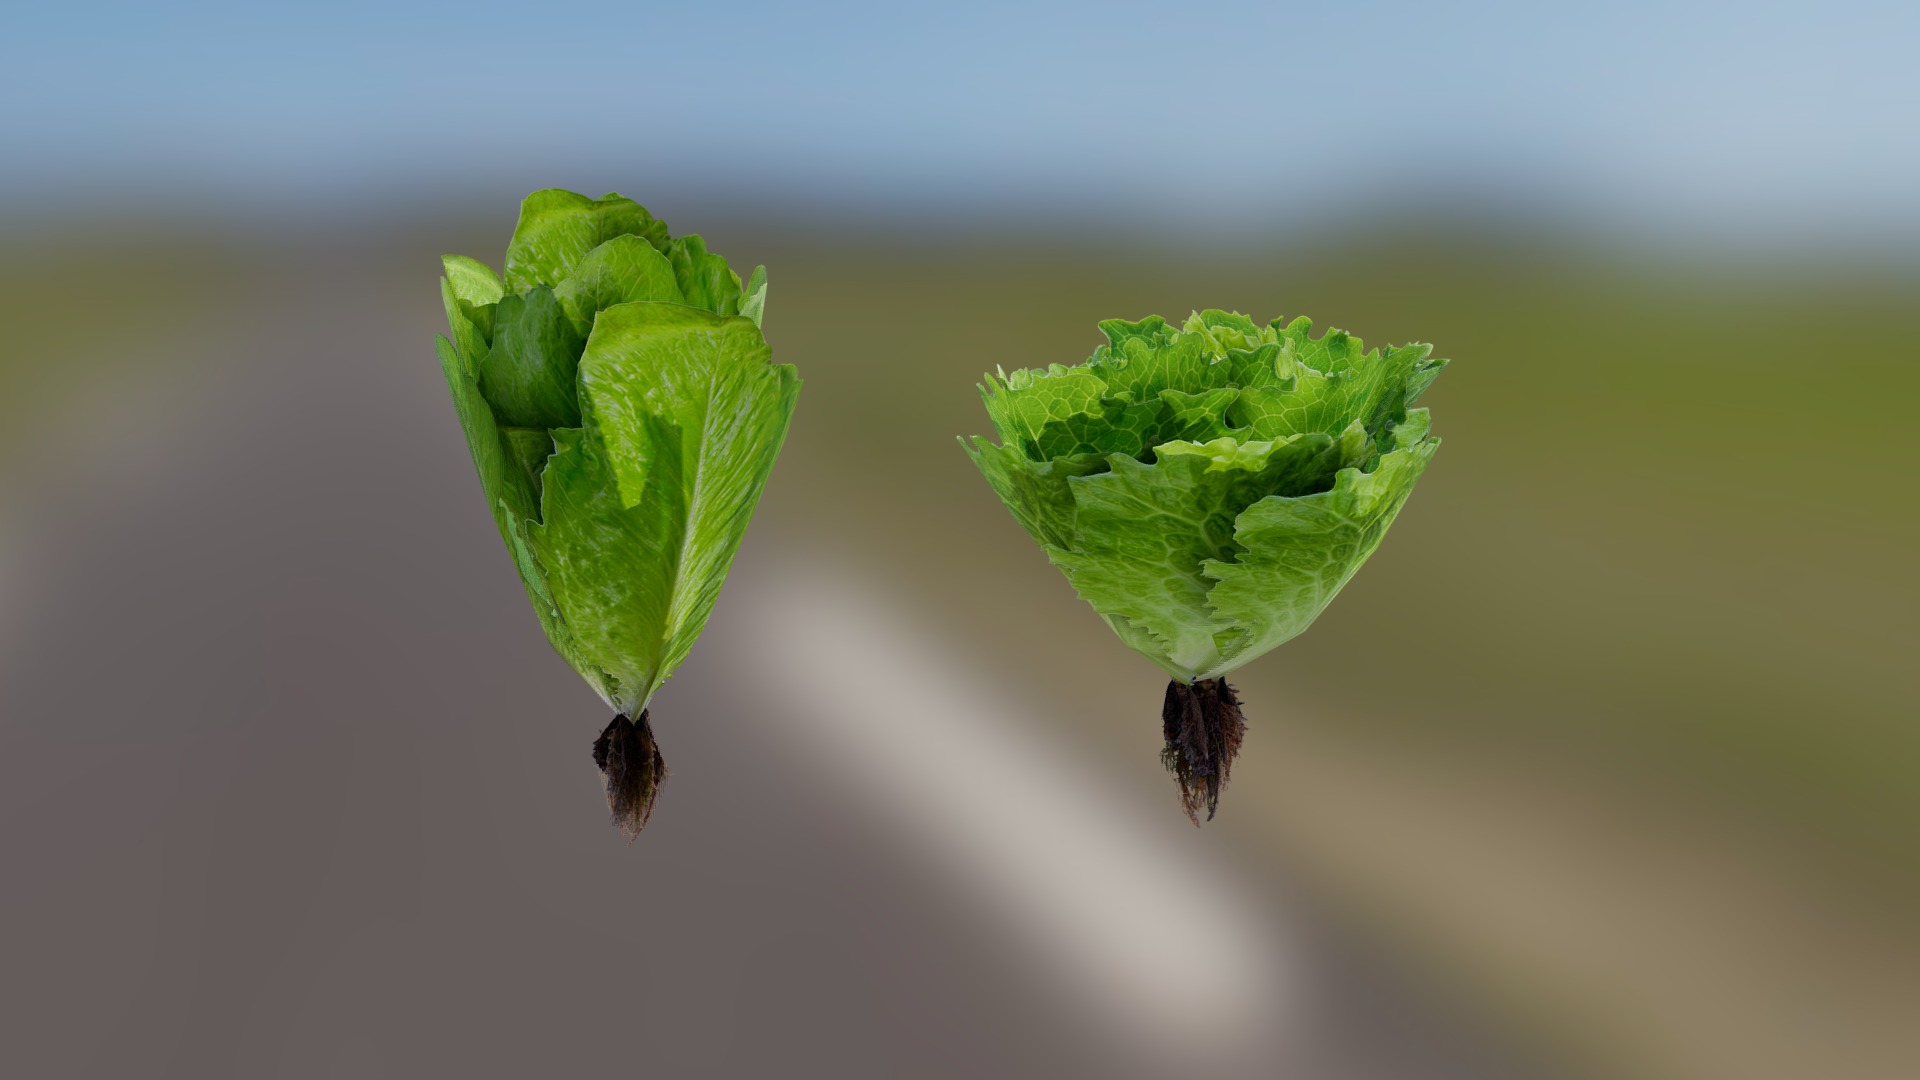 3D model Low poly Lettuces - This is a 3D model of the Low poly Lettuces. The 3D model is about a few leaves on a branch.